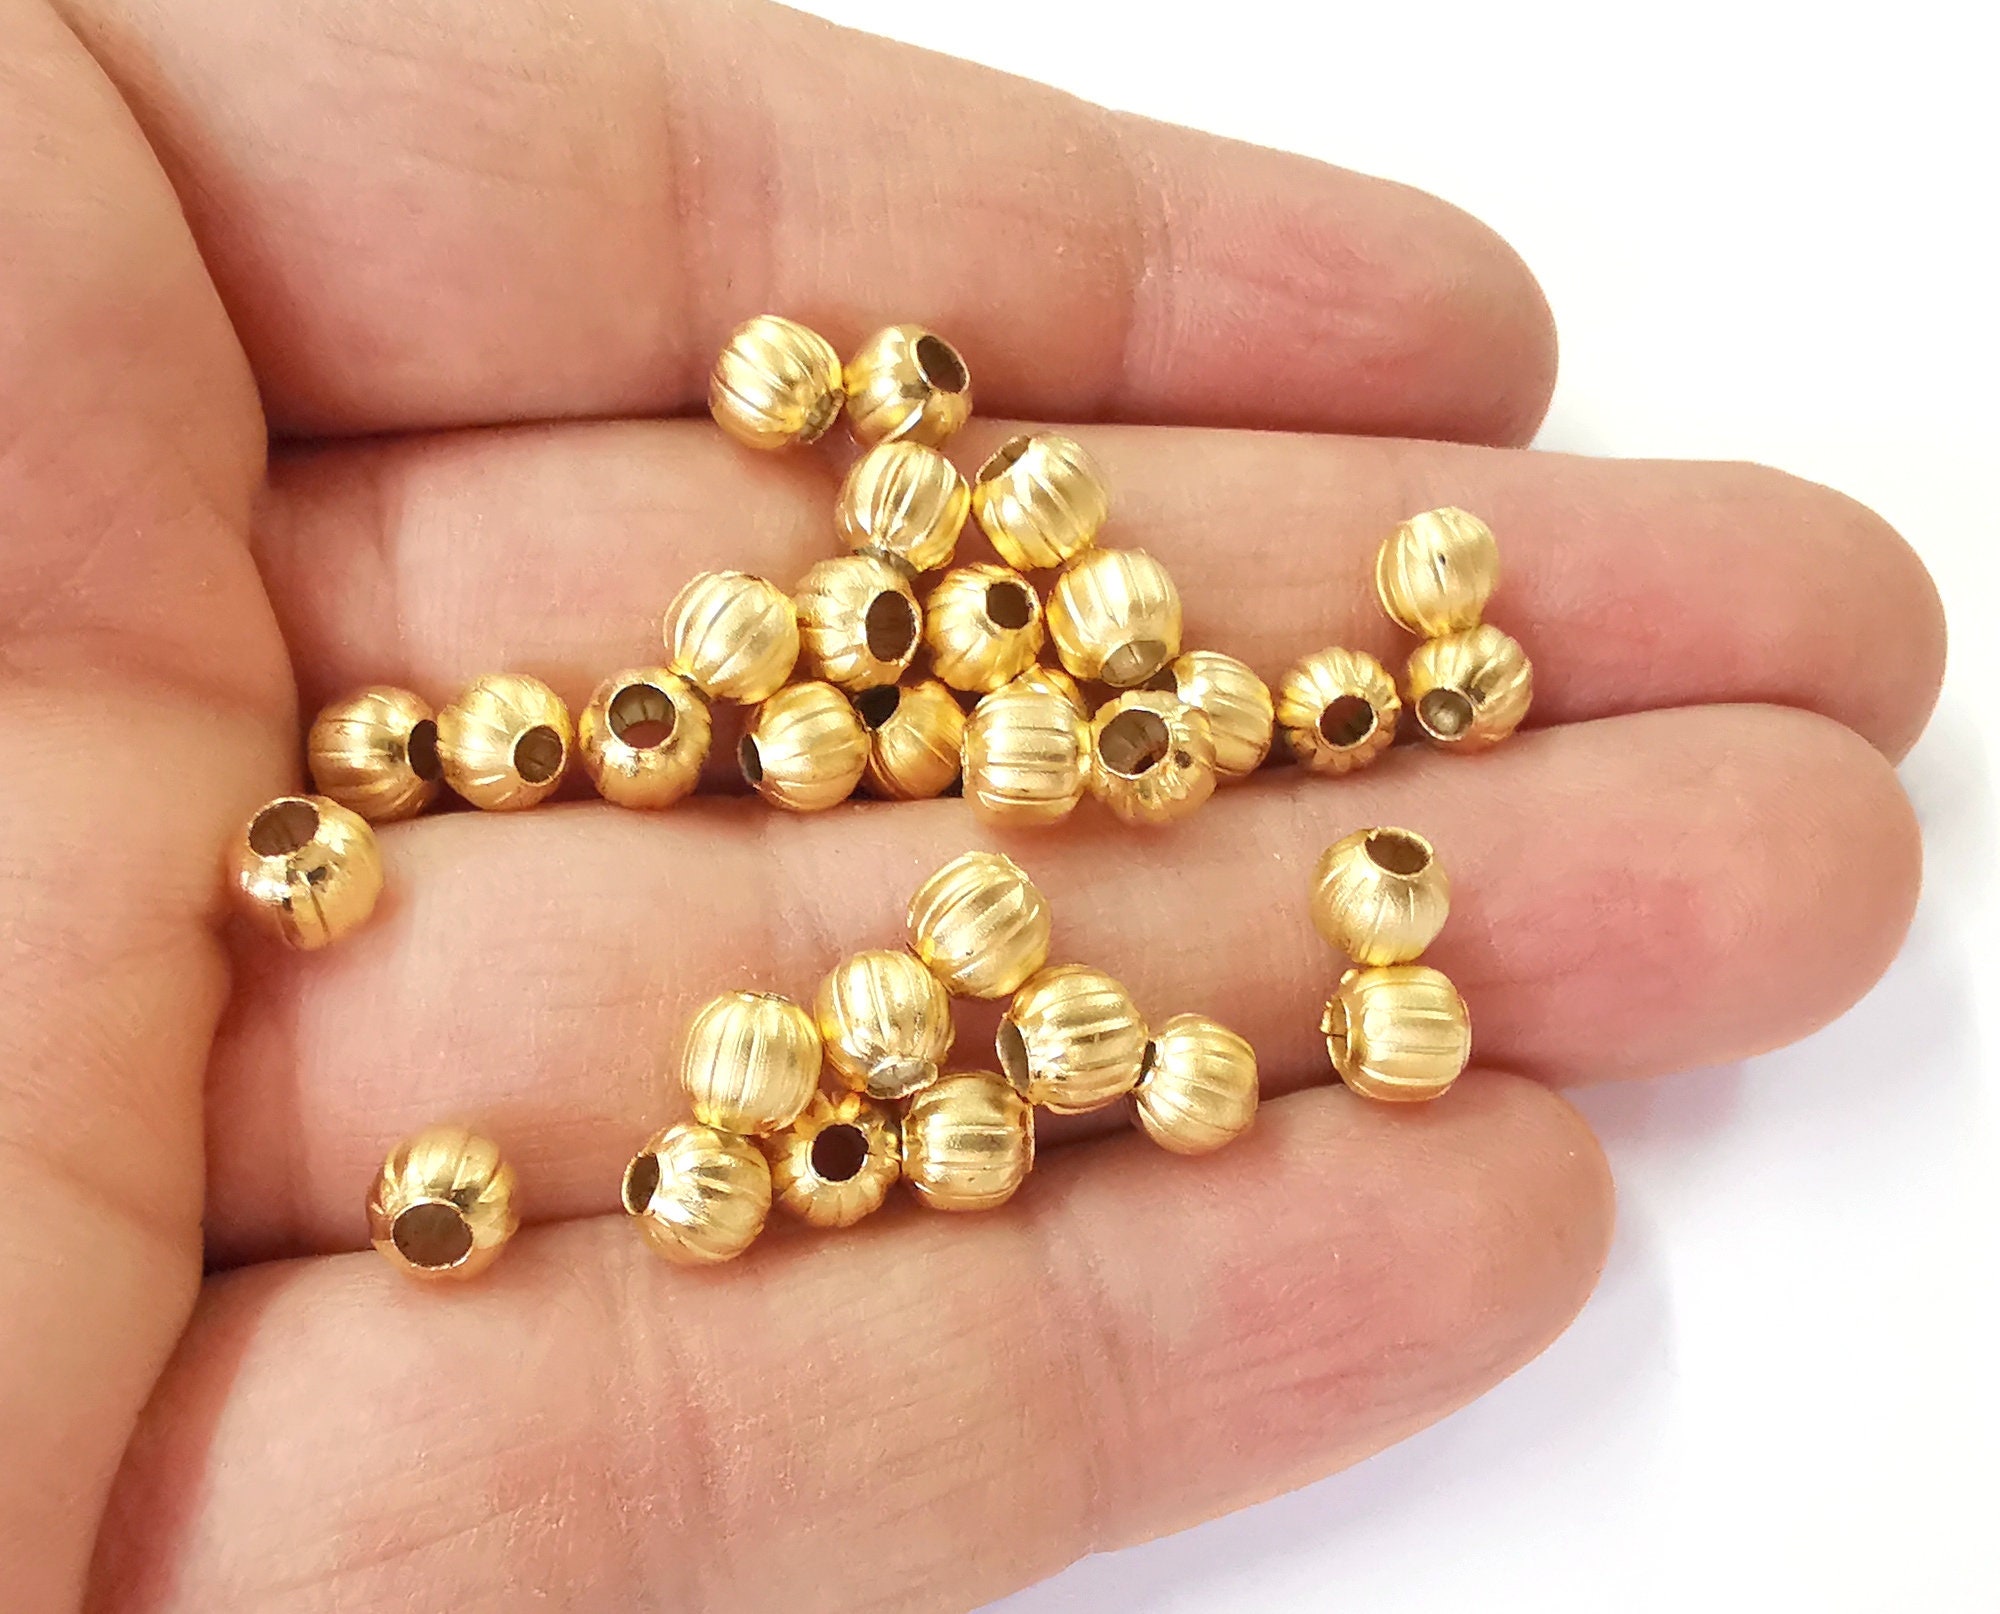 10 Ribbed Round Beads Gold Plated Beads 6mm G24392 -  Denmark